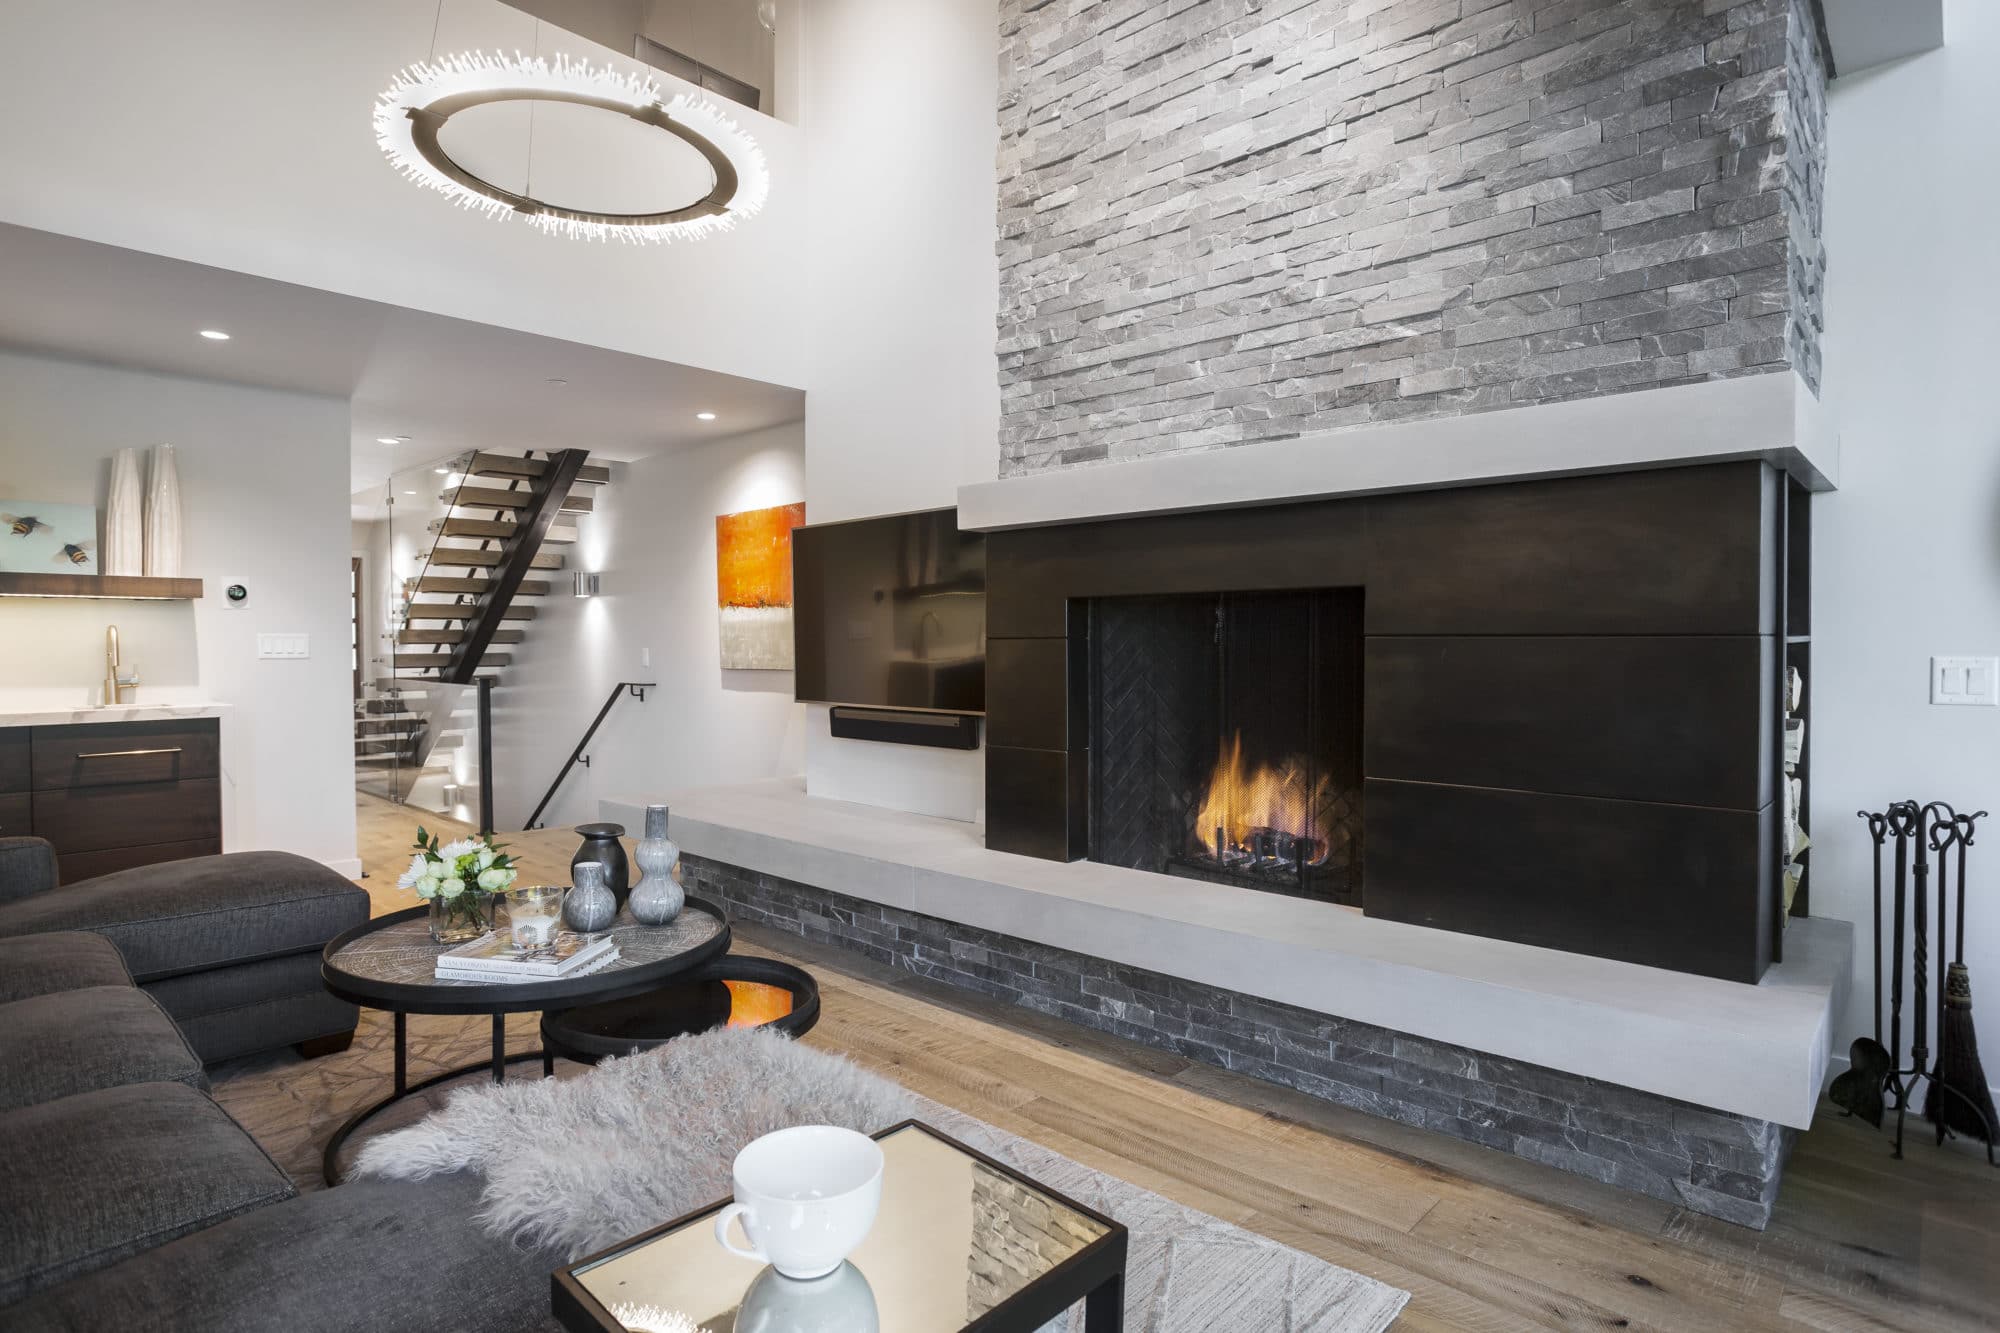 Fire place installation in residential home in Park City Utah